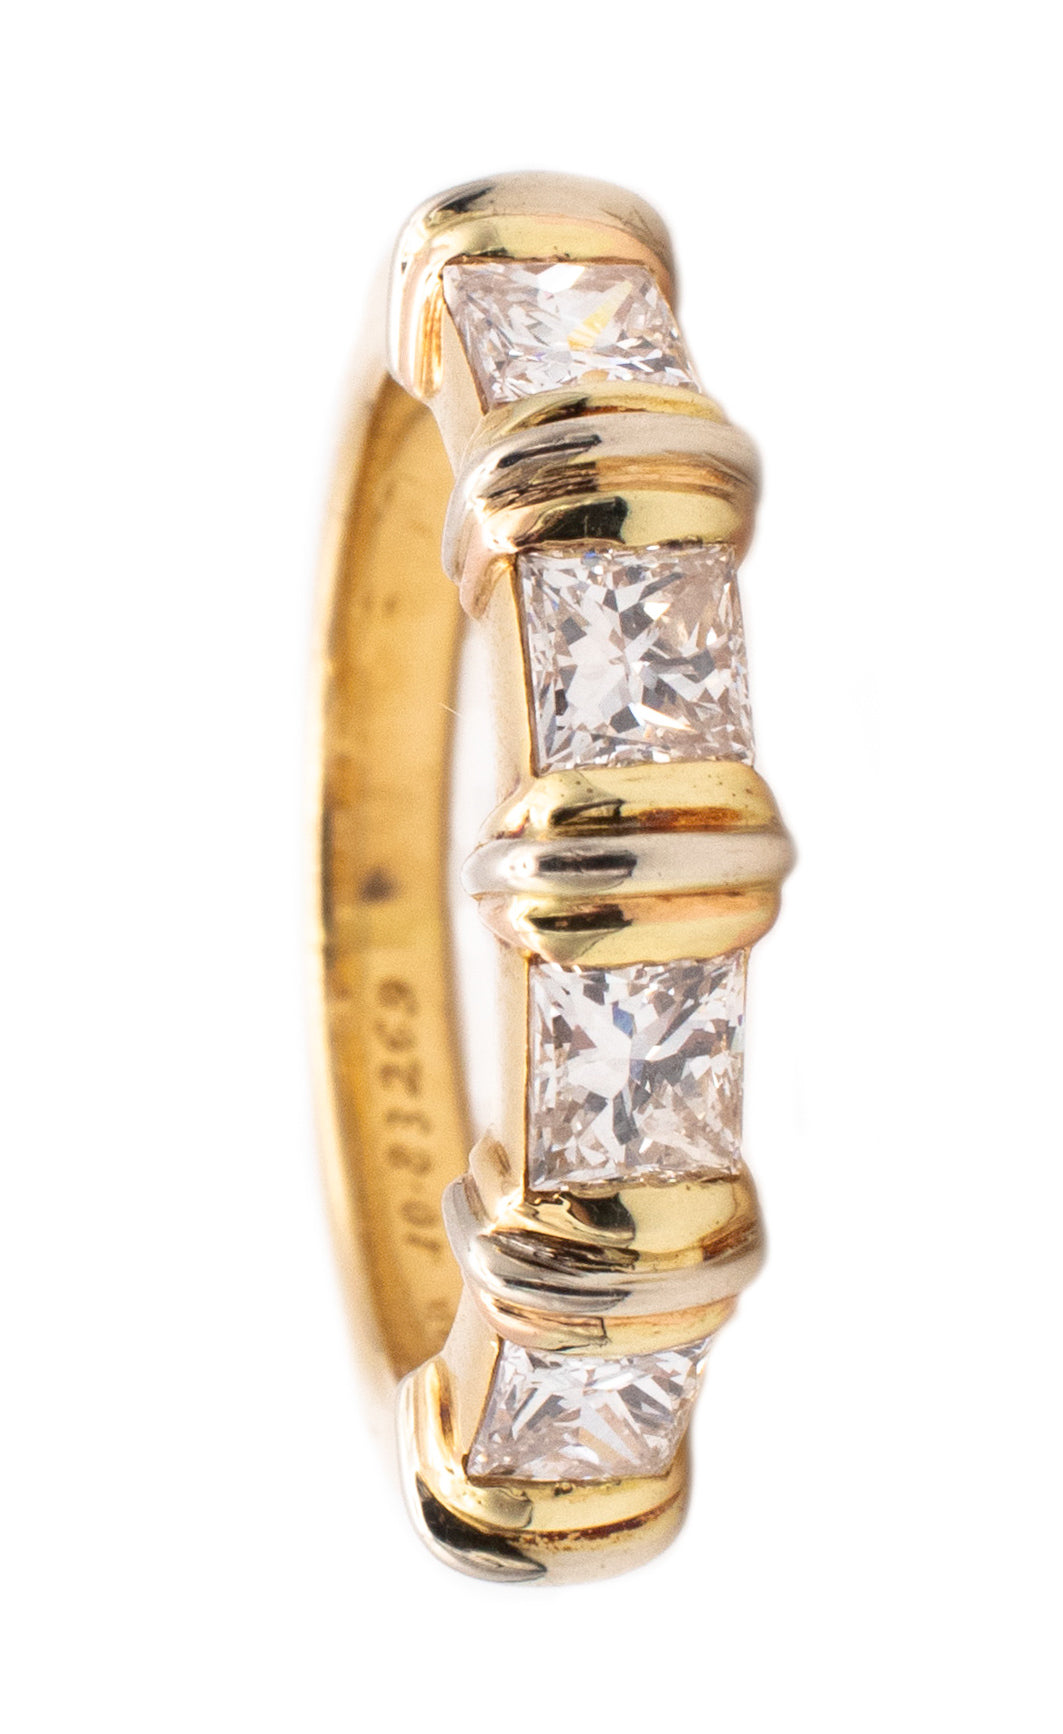 *Cartier Paris Contessa ring in 18 kt yellow gold with 1.0 Cts in VVS diamonds